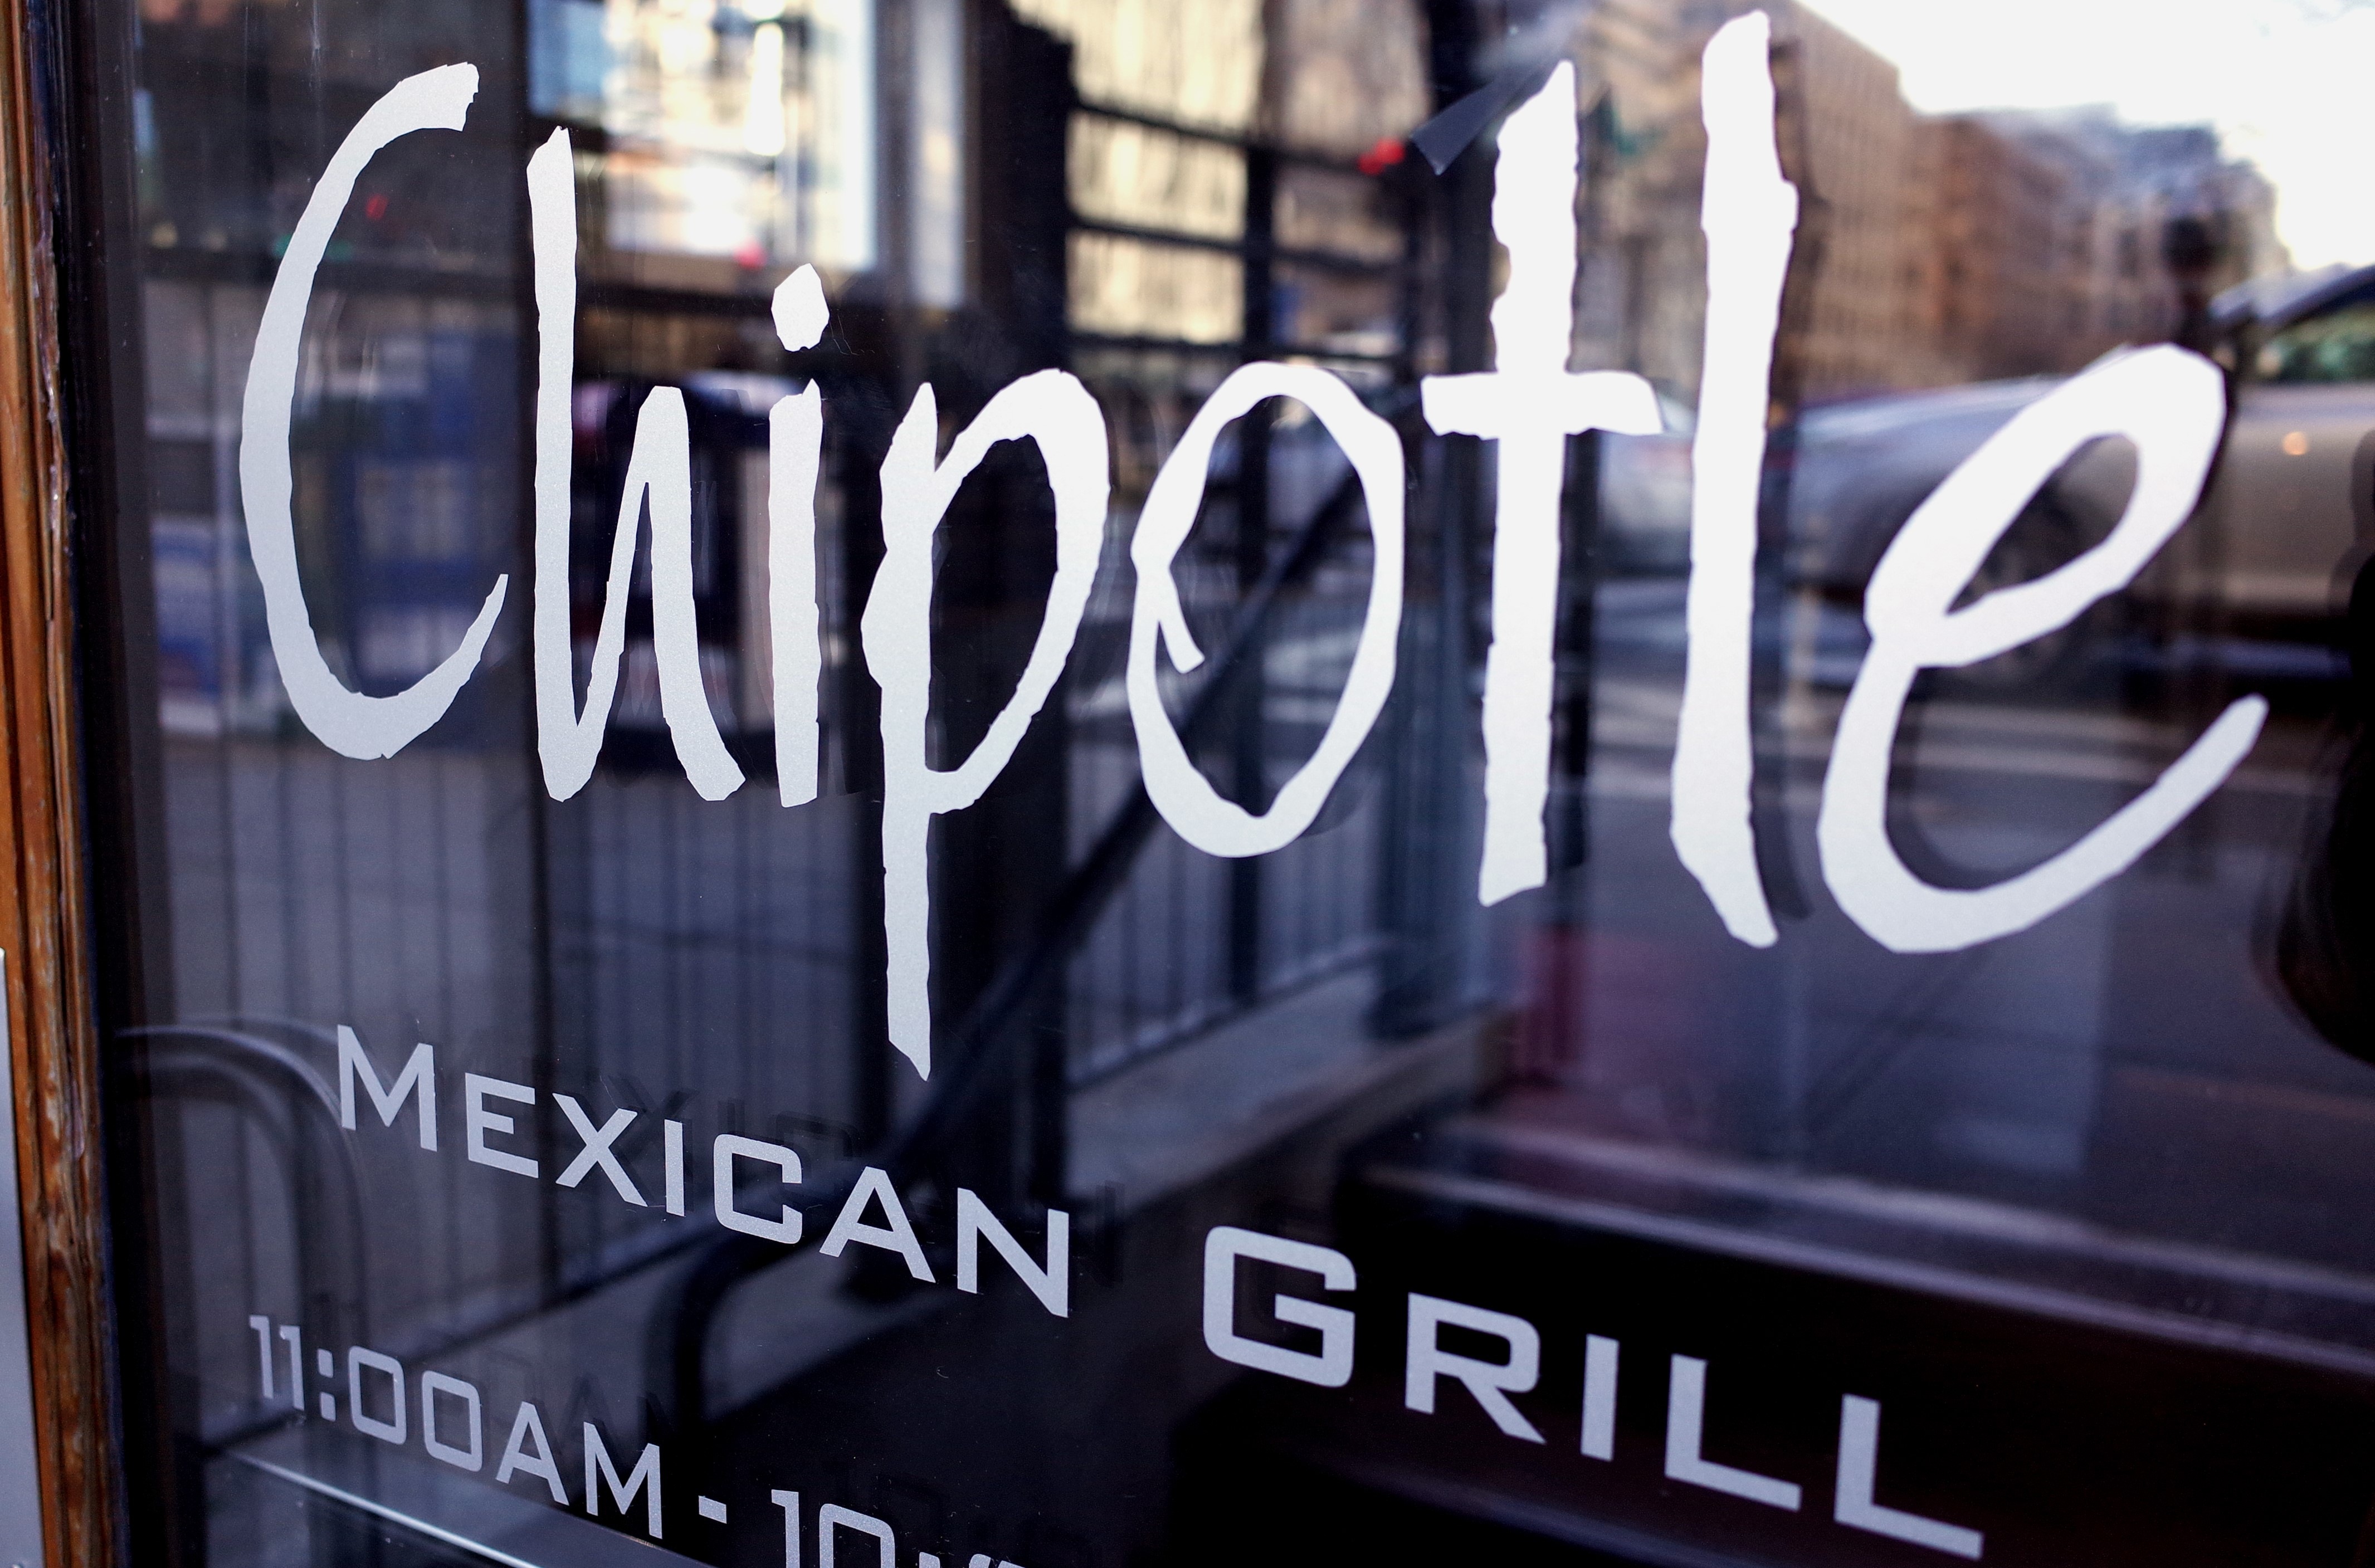 The Chipotle logo is seen on the door of one of its restaurants on January 11, 2015 in Washington, DC. (Mandel Ngan—AFP/Getty Images)